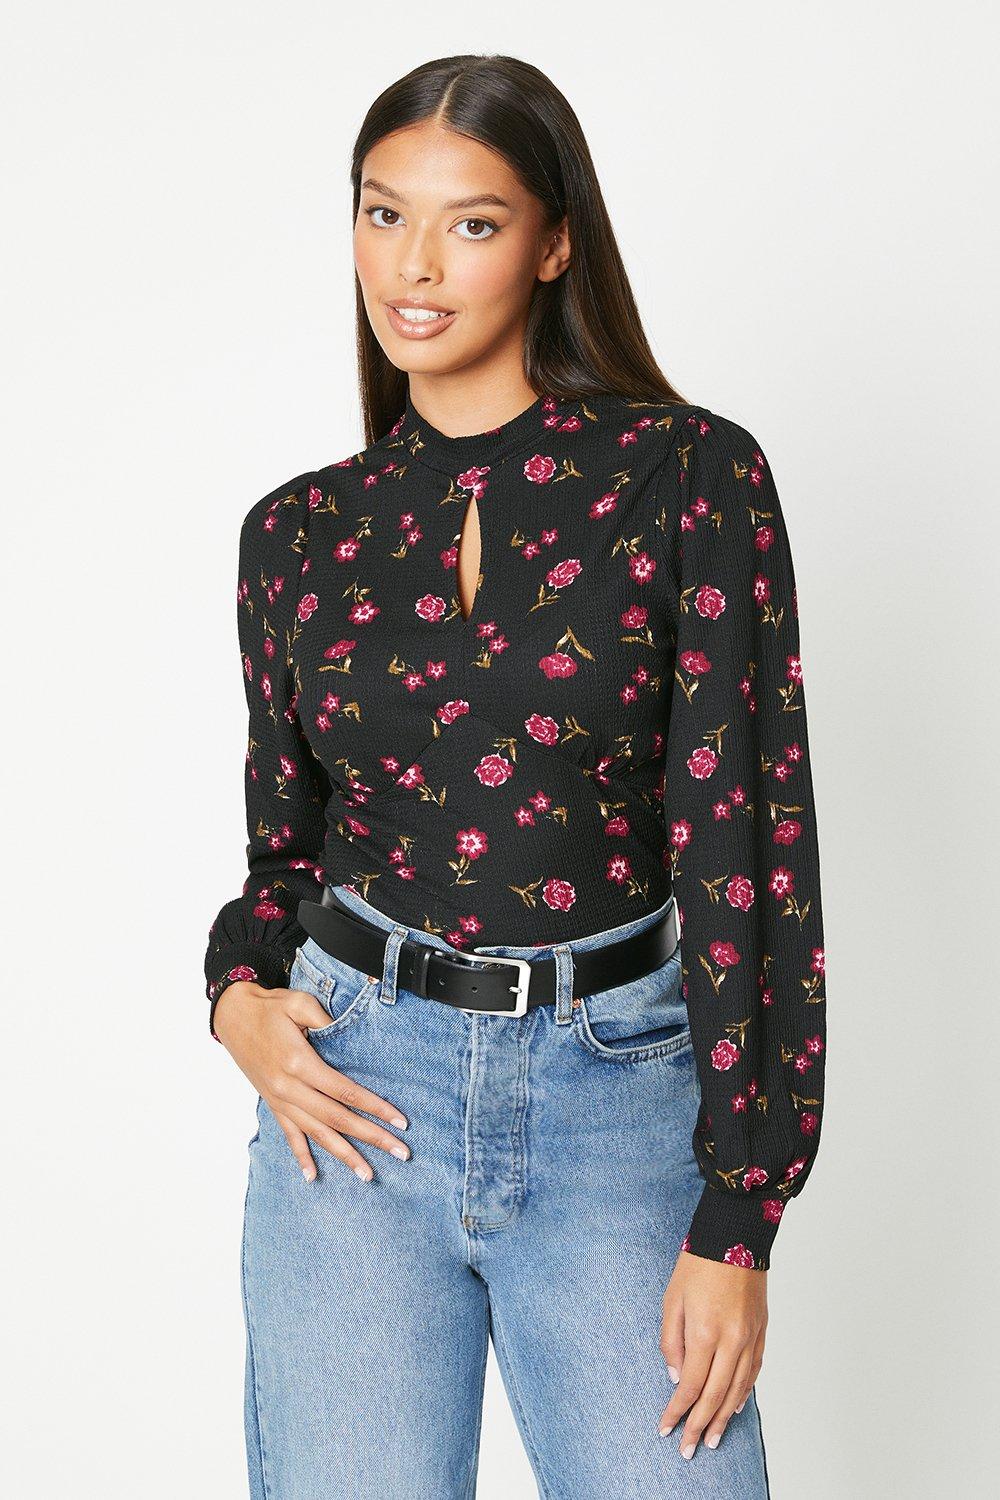 Women’s Red Floral Keyhole Detail Long Sleeve Top - black - L